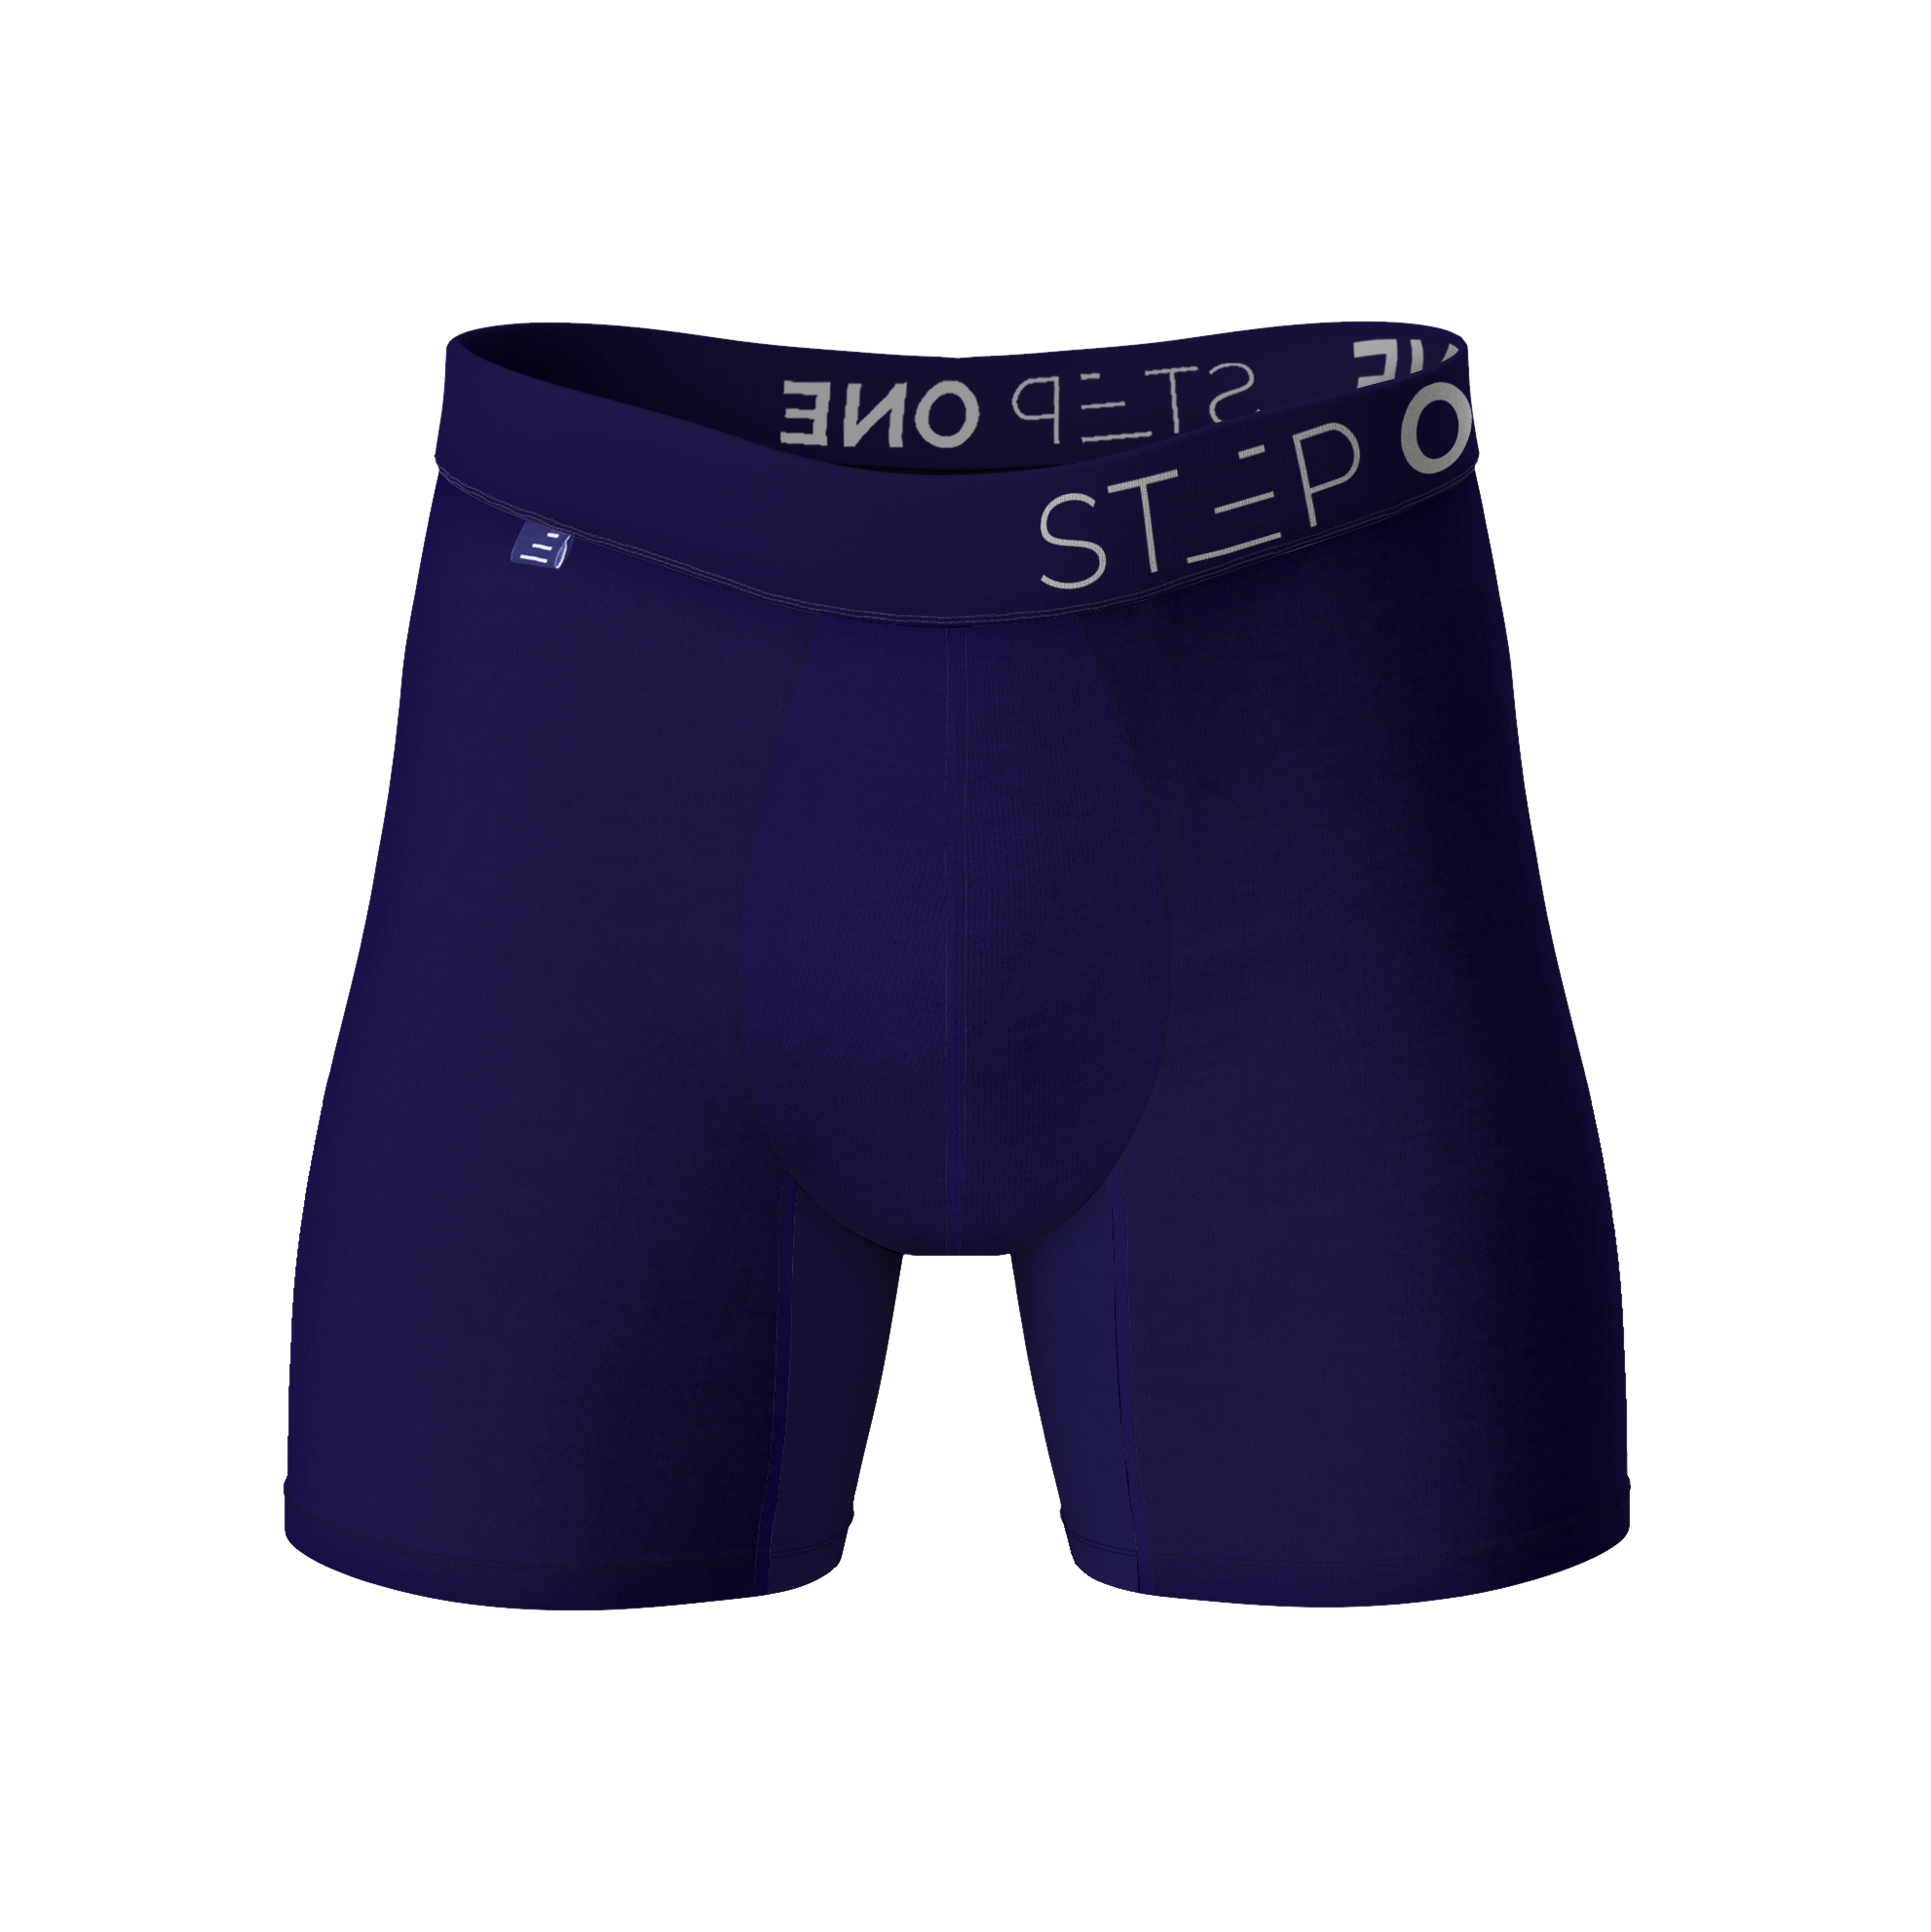 Boxer Brief - Midnight Blues - View 1